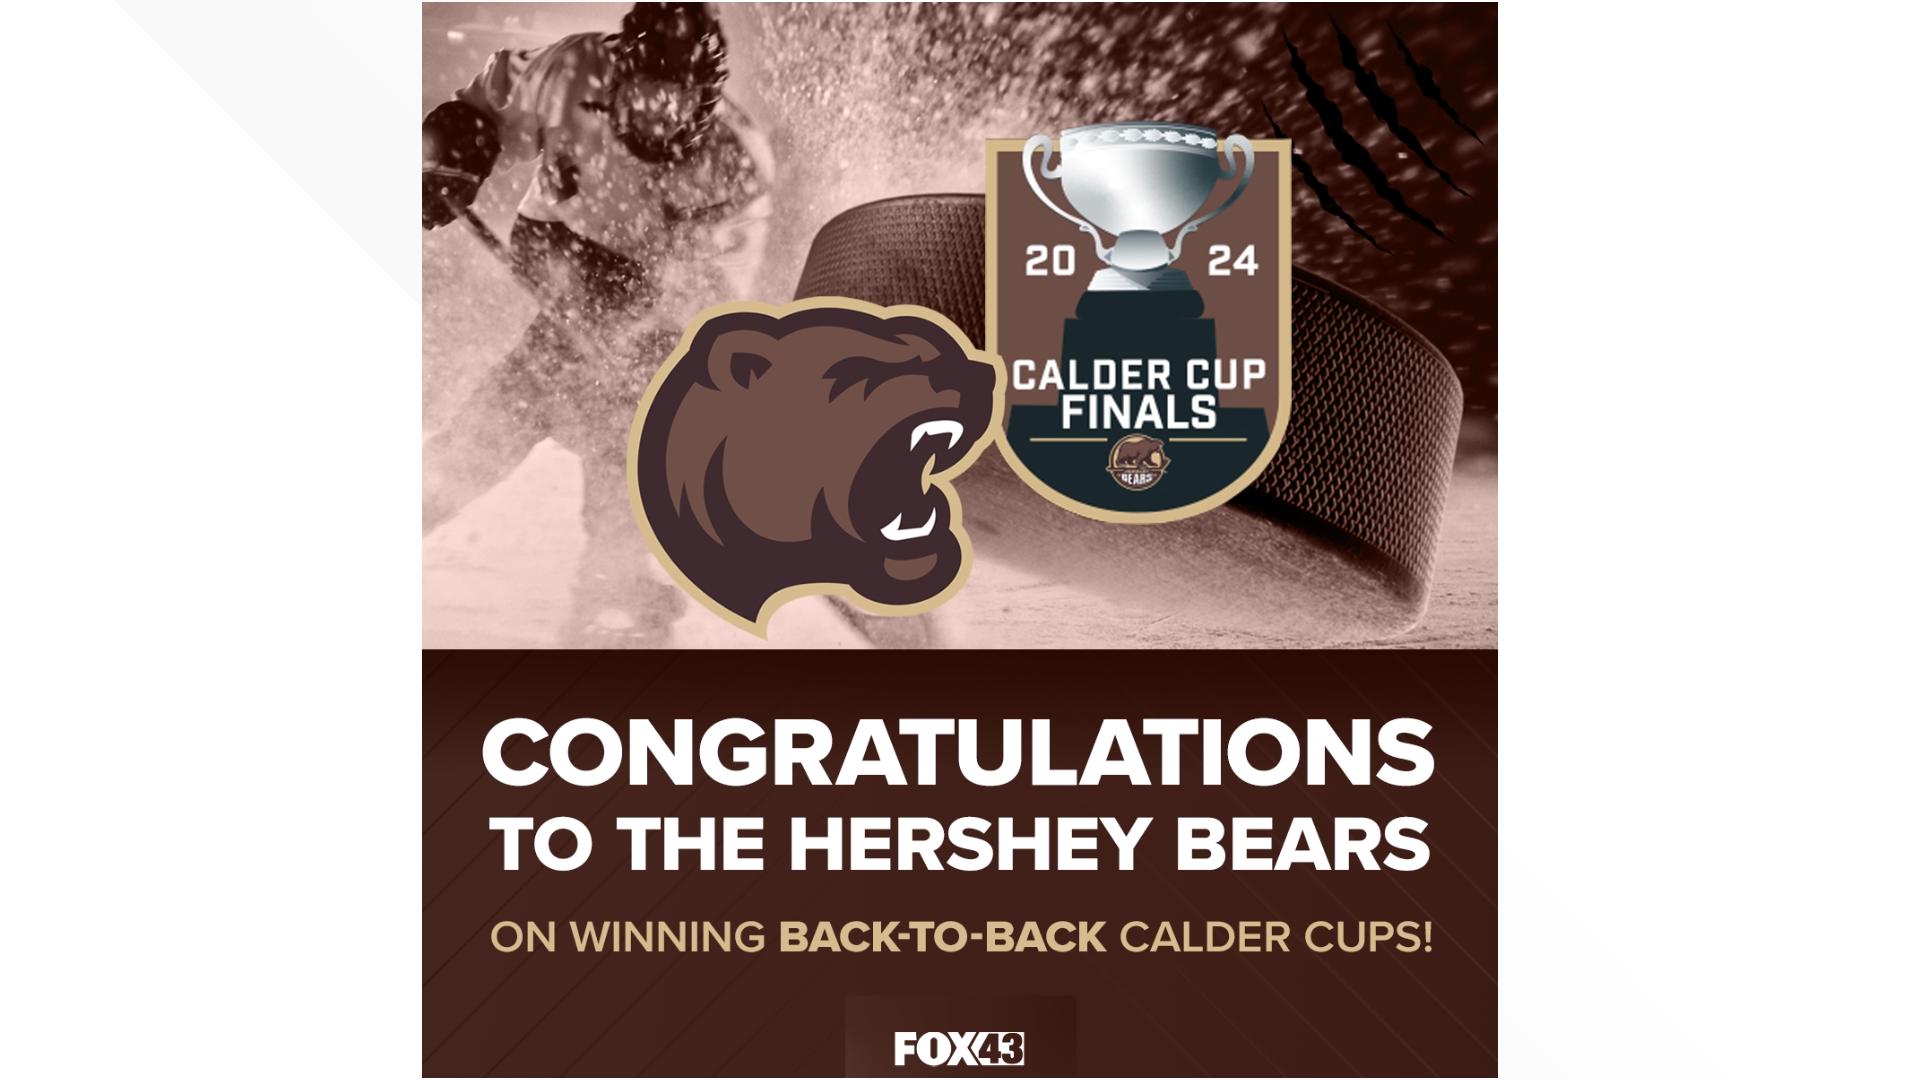 The Hershey Bears celebrated their 13th Calder Cup title in franchise history with a ceremony at GIANT Center.